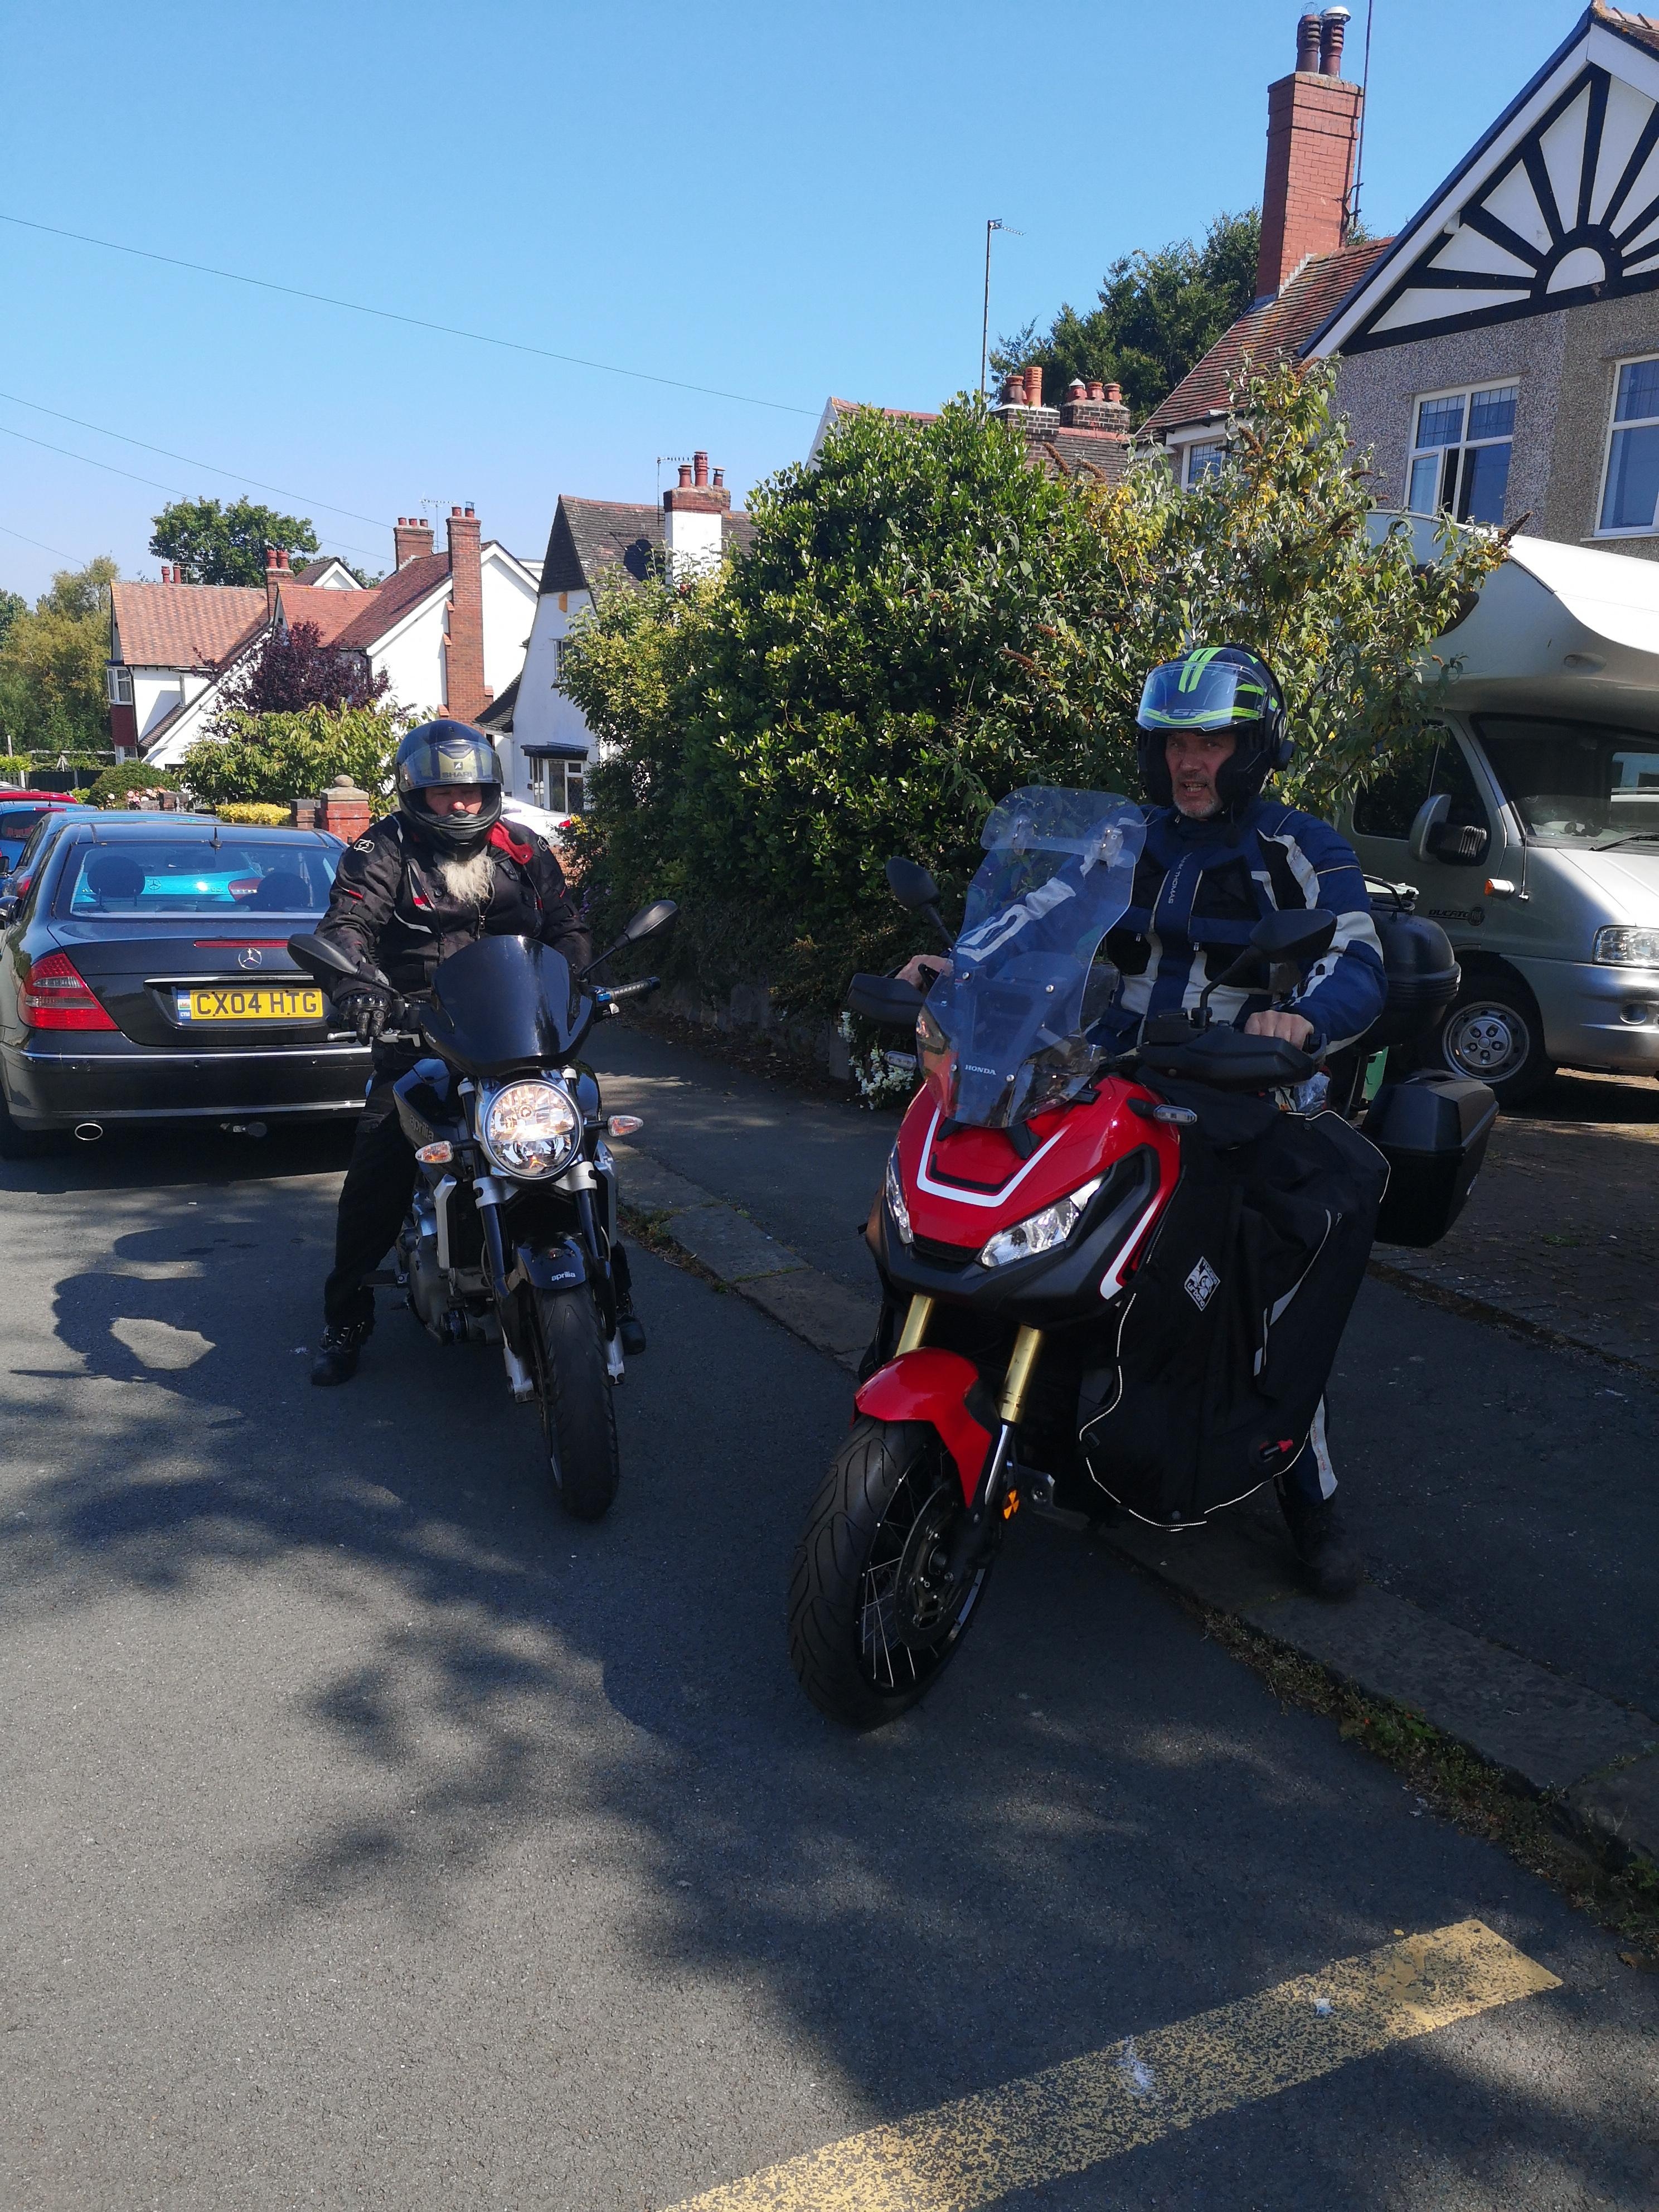 Dave and his friend on their motorbikes 